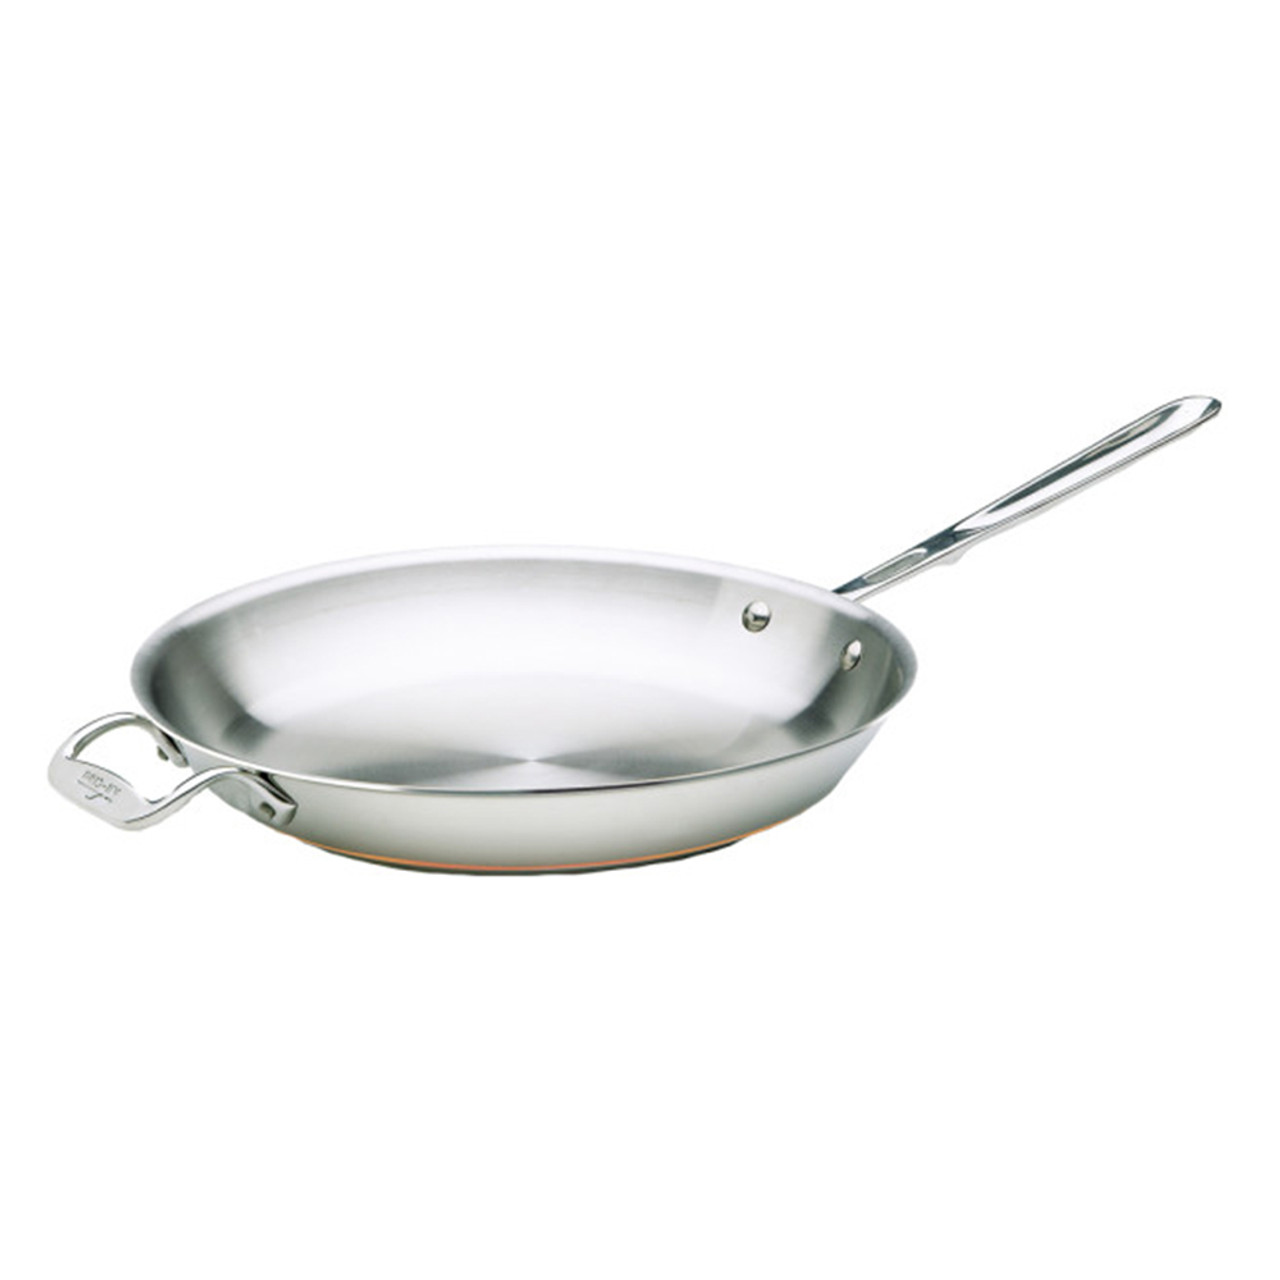 https://cdn11.bigcommerce.com/s-hccytny0od/images/stencil/1280x1280/products/507/1921/all-clad-copper-core-fry-pan-12-inch__48306.1511048153.jpg?c=2?imbypass=on